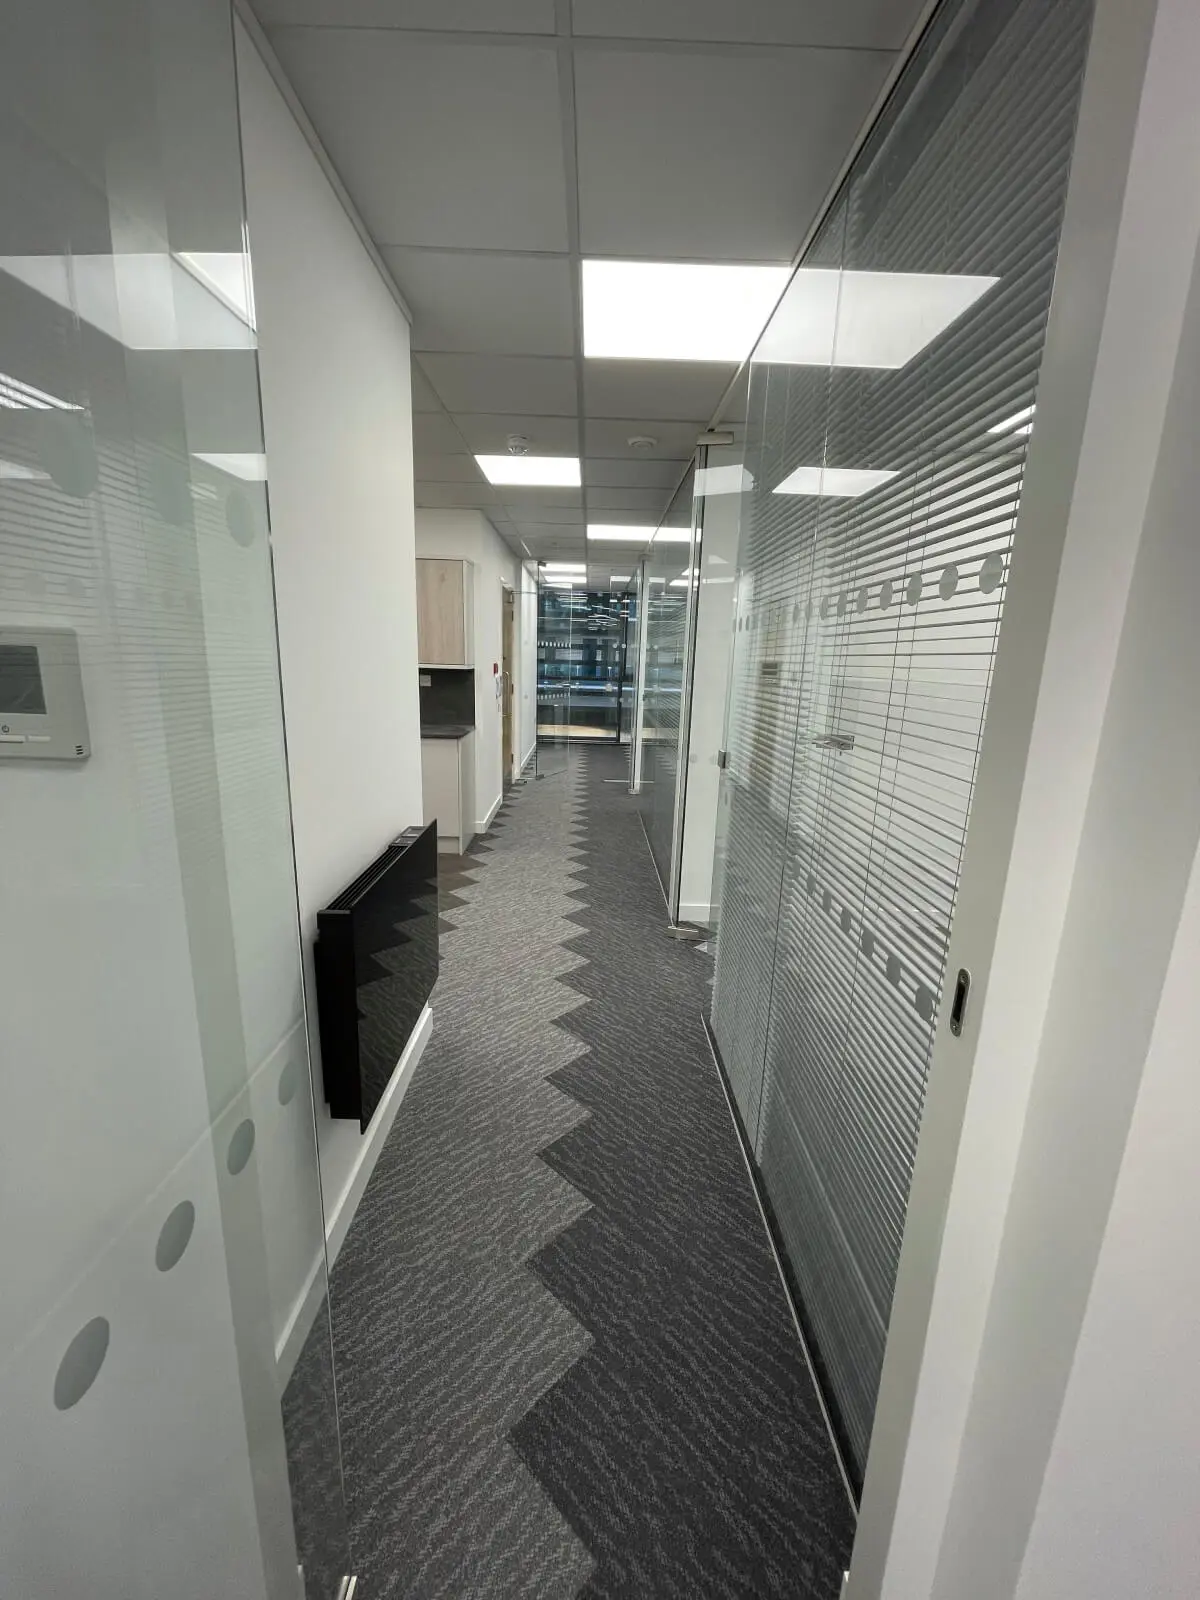 Hemsley Miller office space with designer flooring, funriture and single glazed glass partitions 13